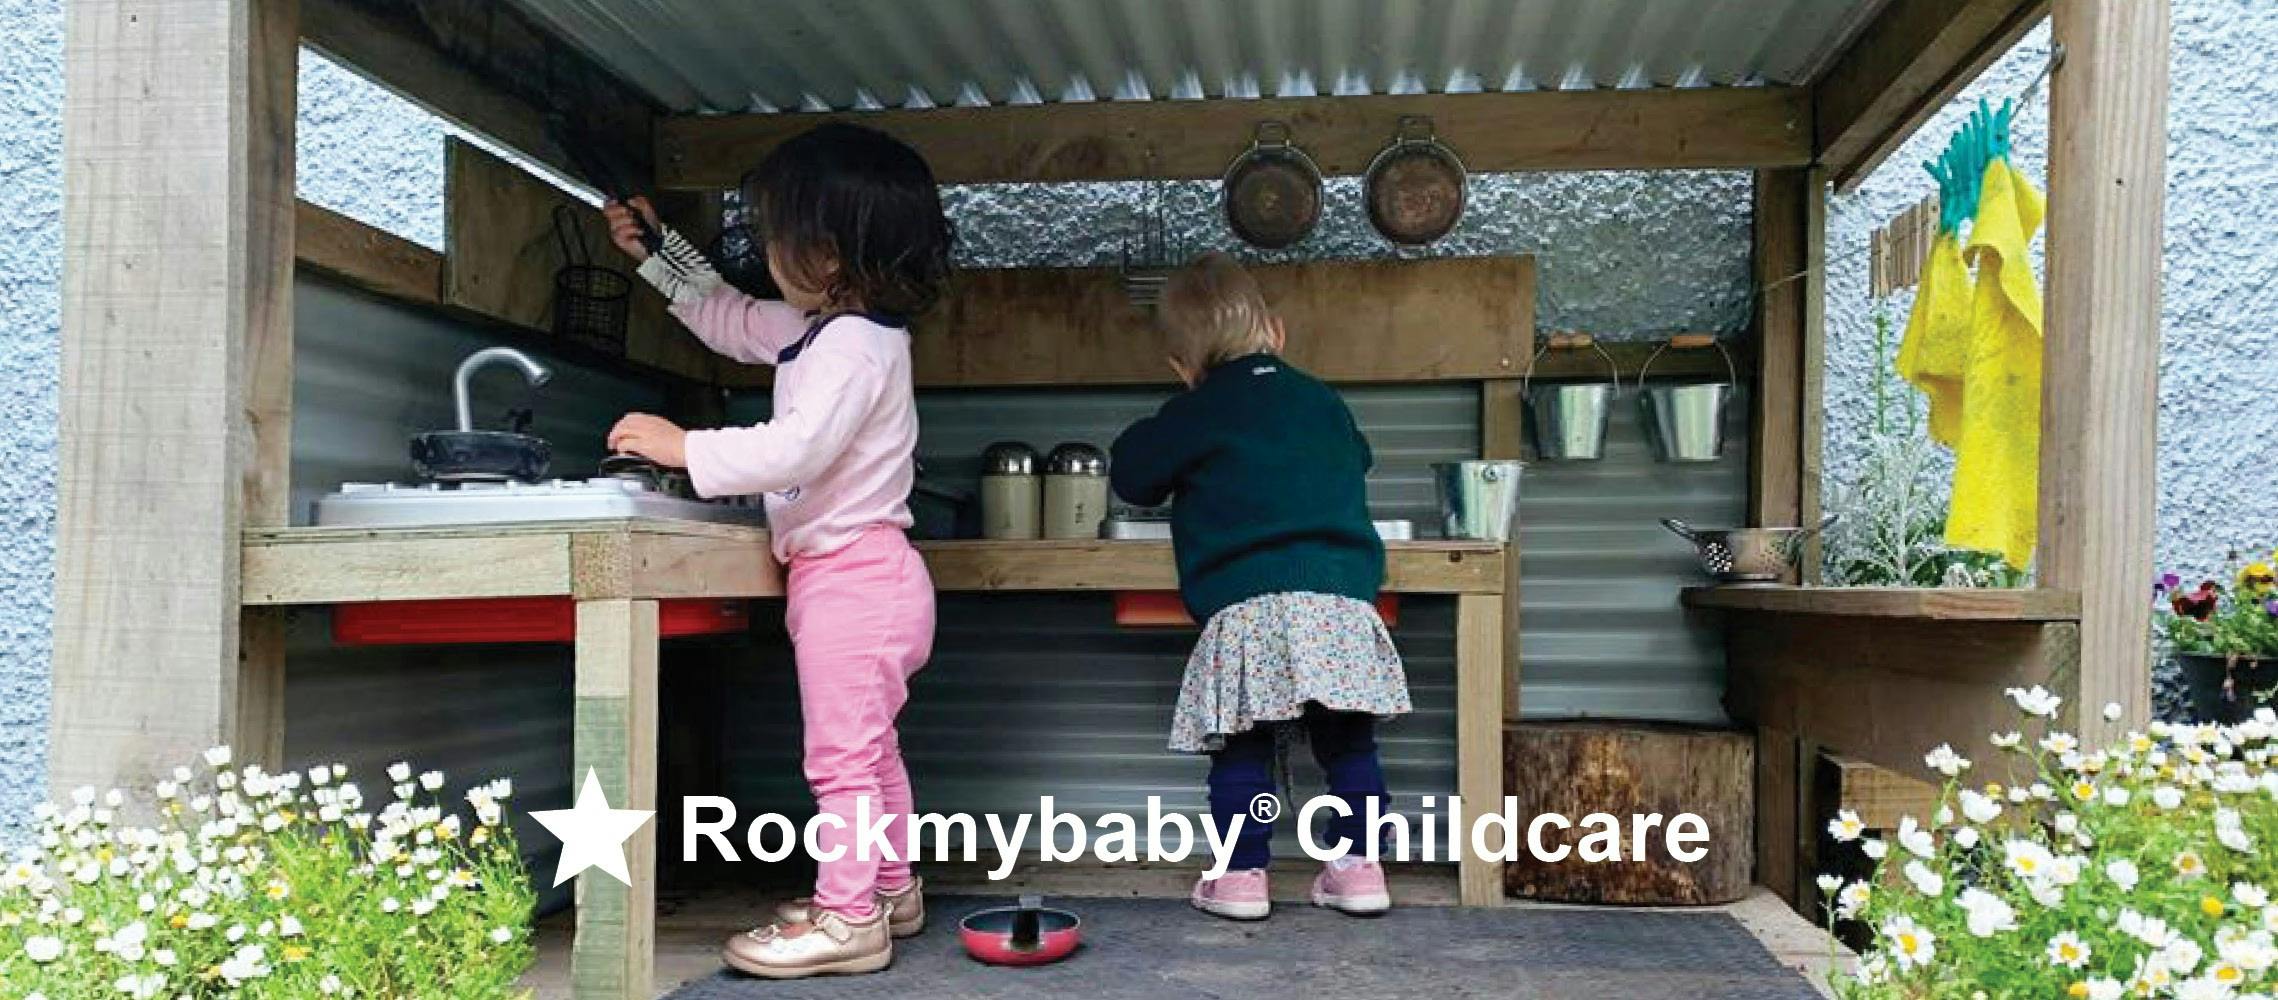 A picture of Rockmybaby Childcare